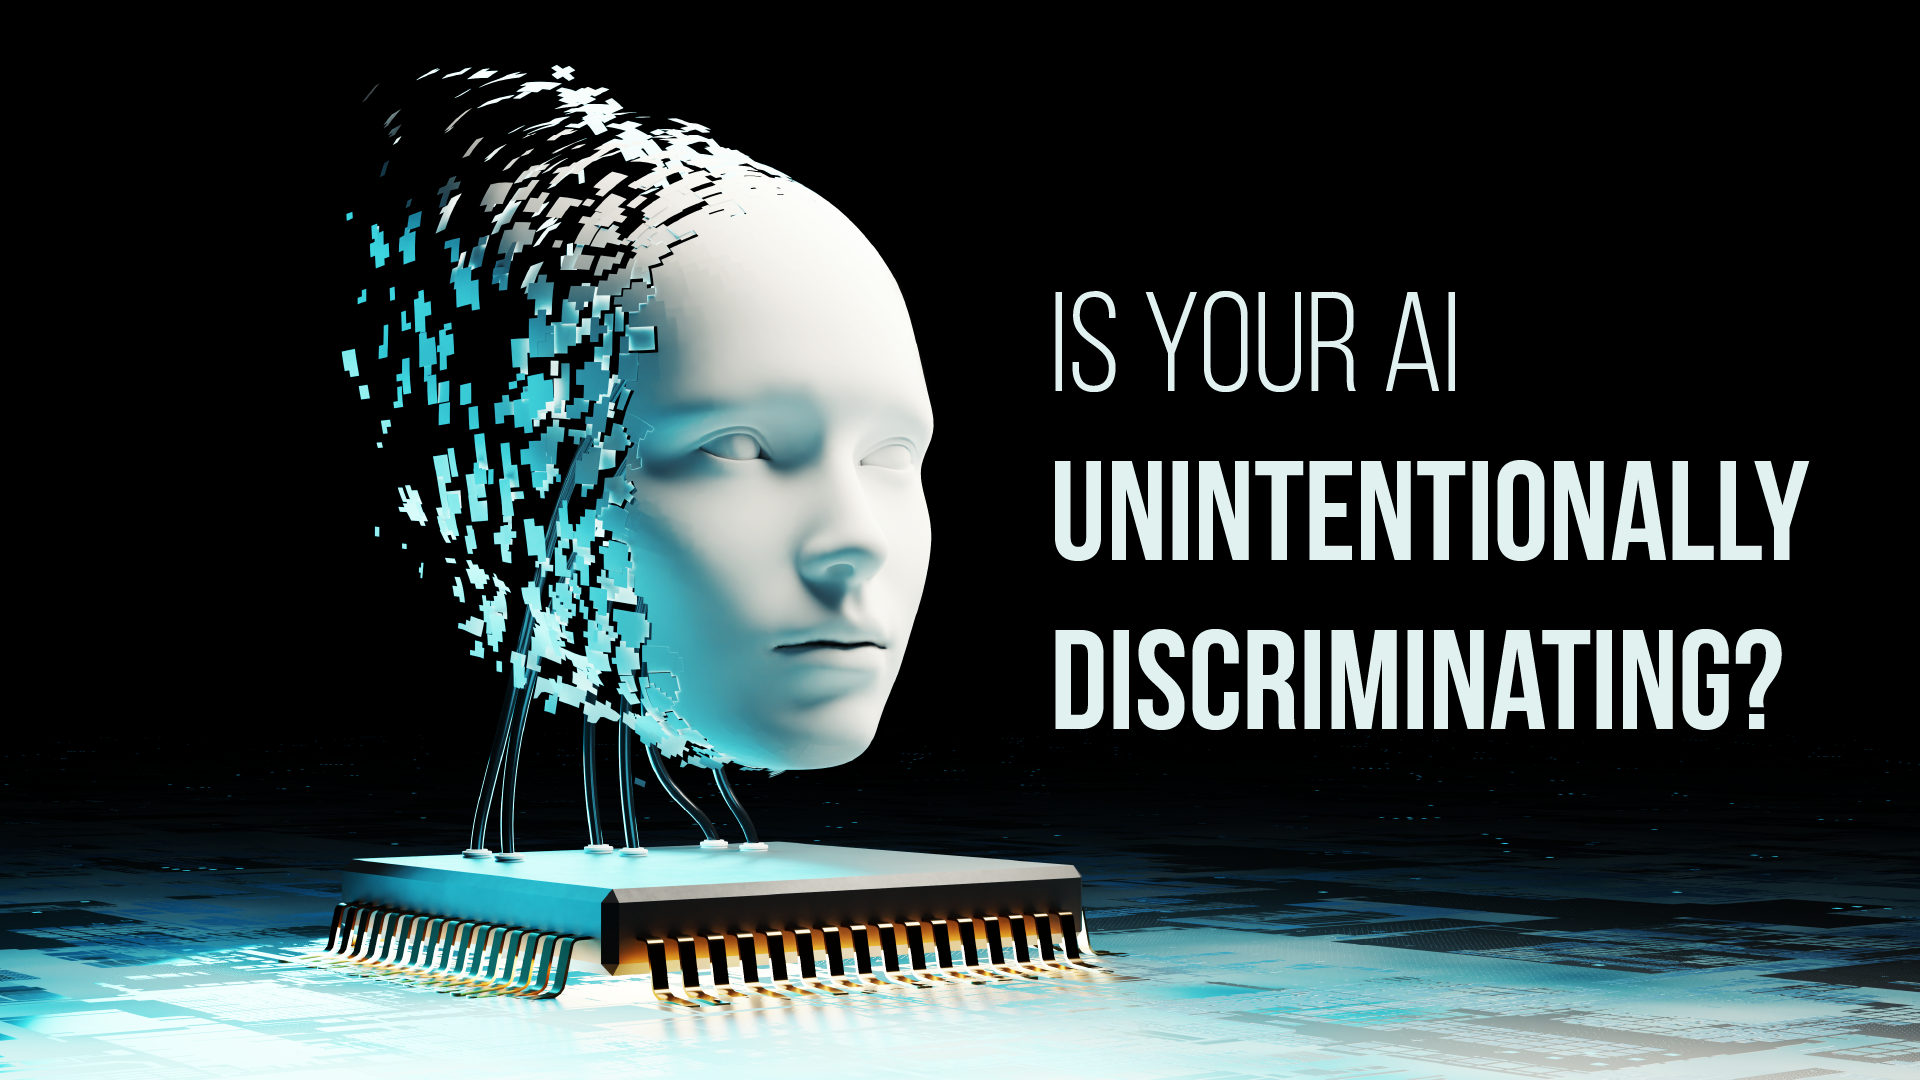 Is Your AI Unintentionally Discriminating?